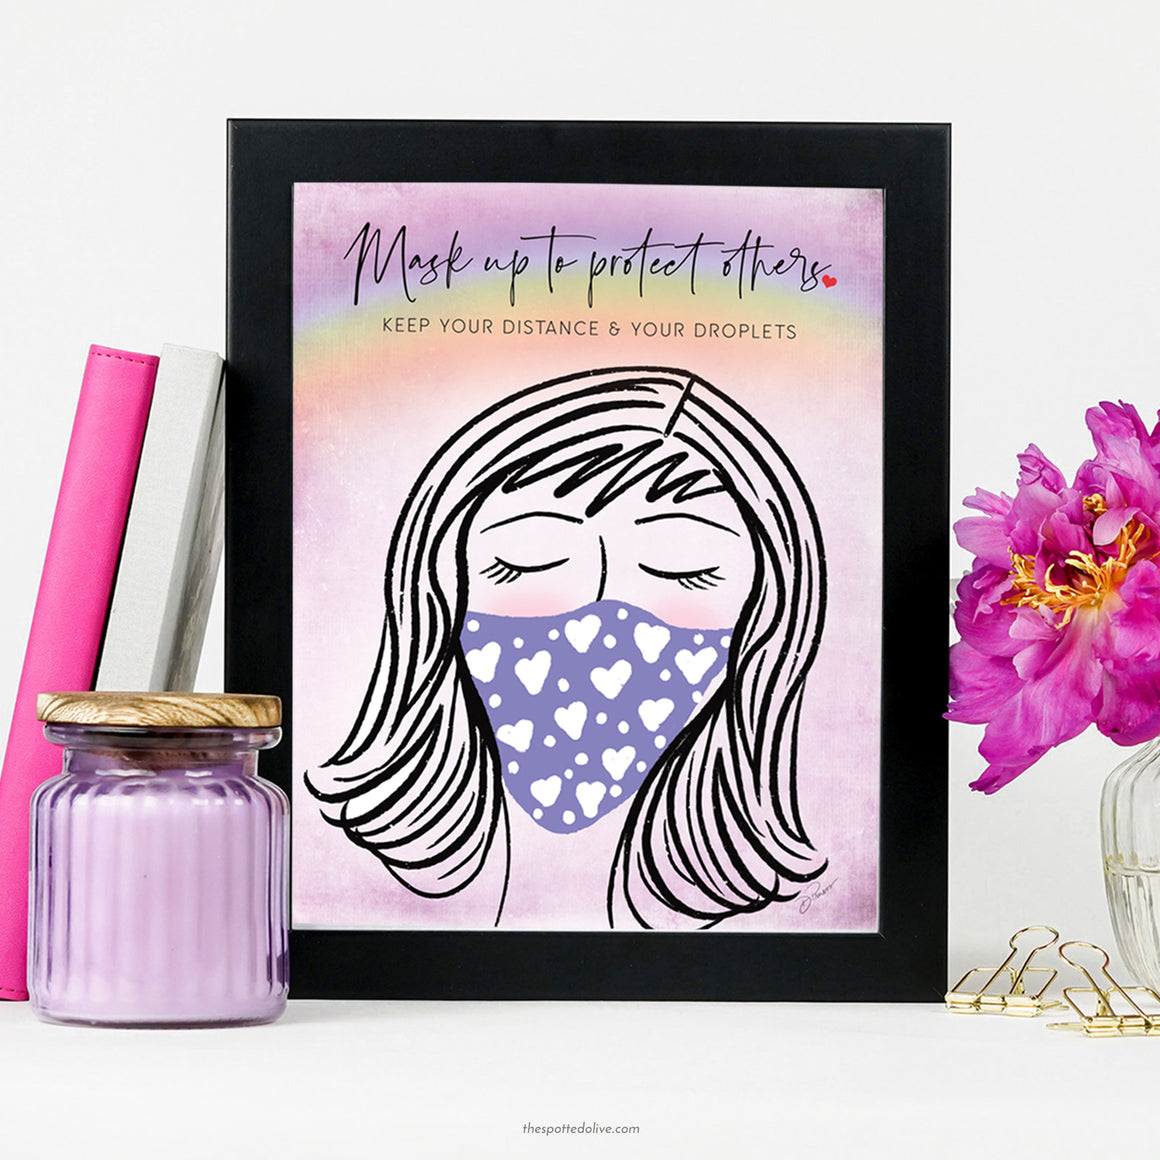 Mask Up Printable Art Shop Sign by The Spotted Olive - Scene